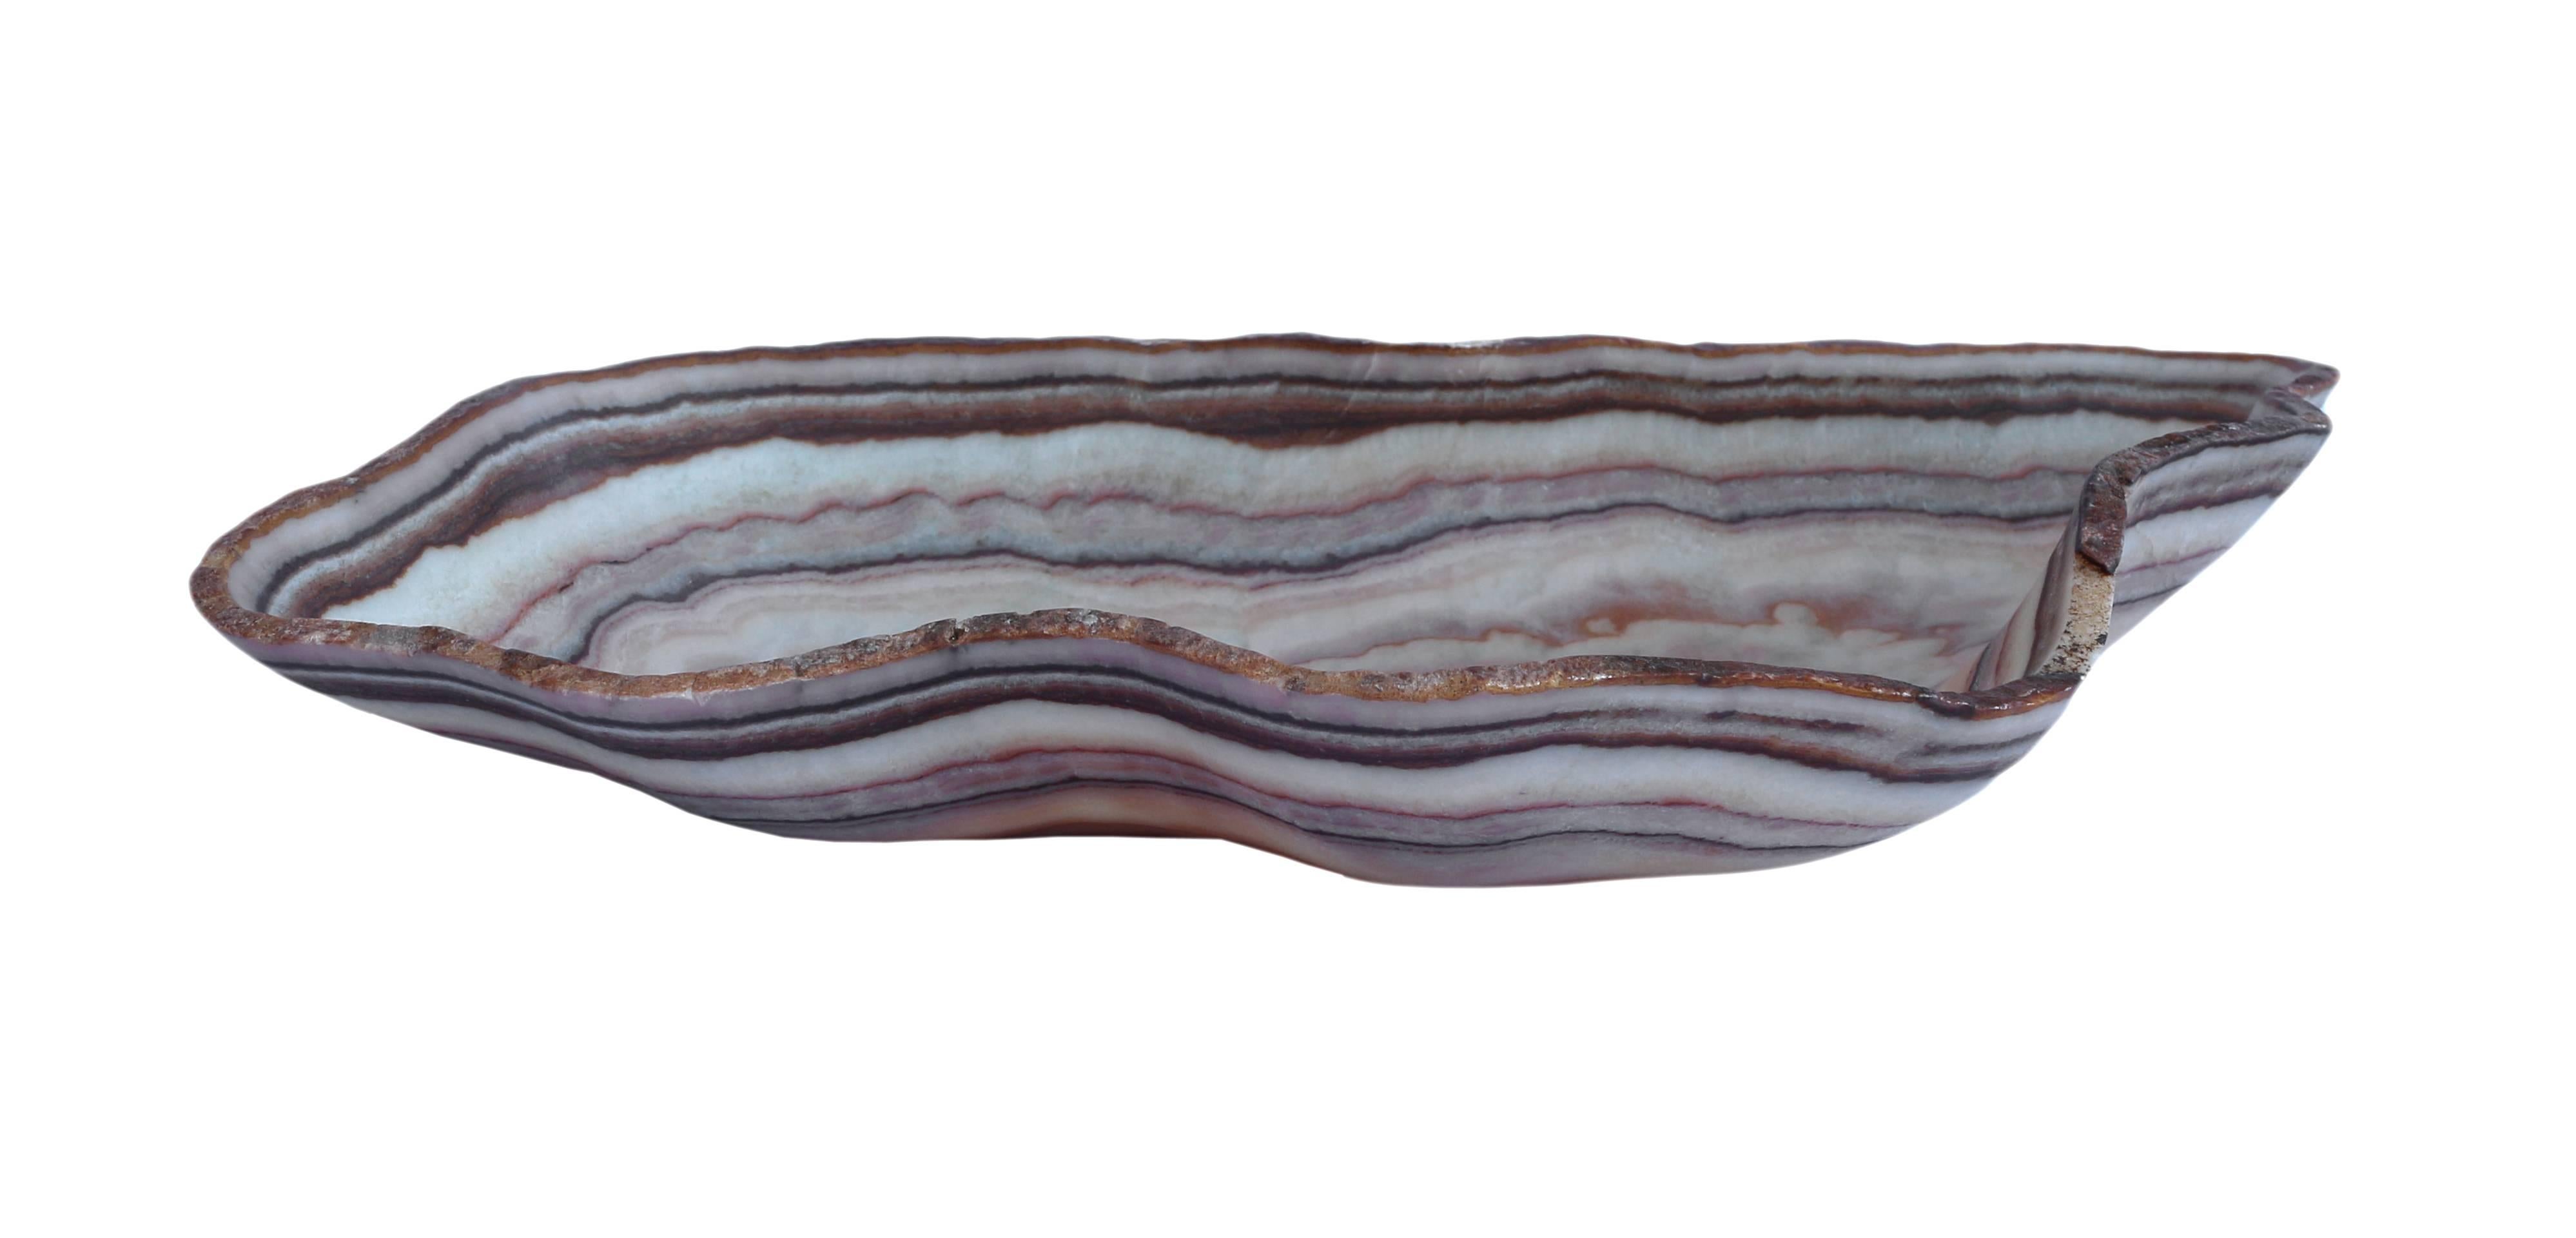 Free- form hand-carved onyx bowl. Dimensions are approximate due to variations in the natural shape and height.